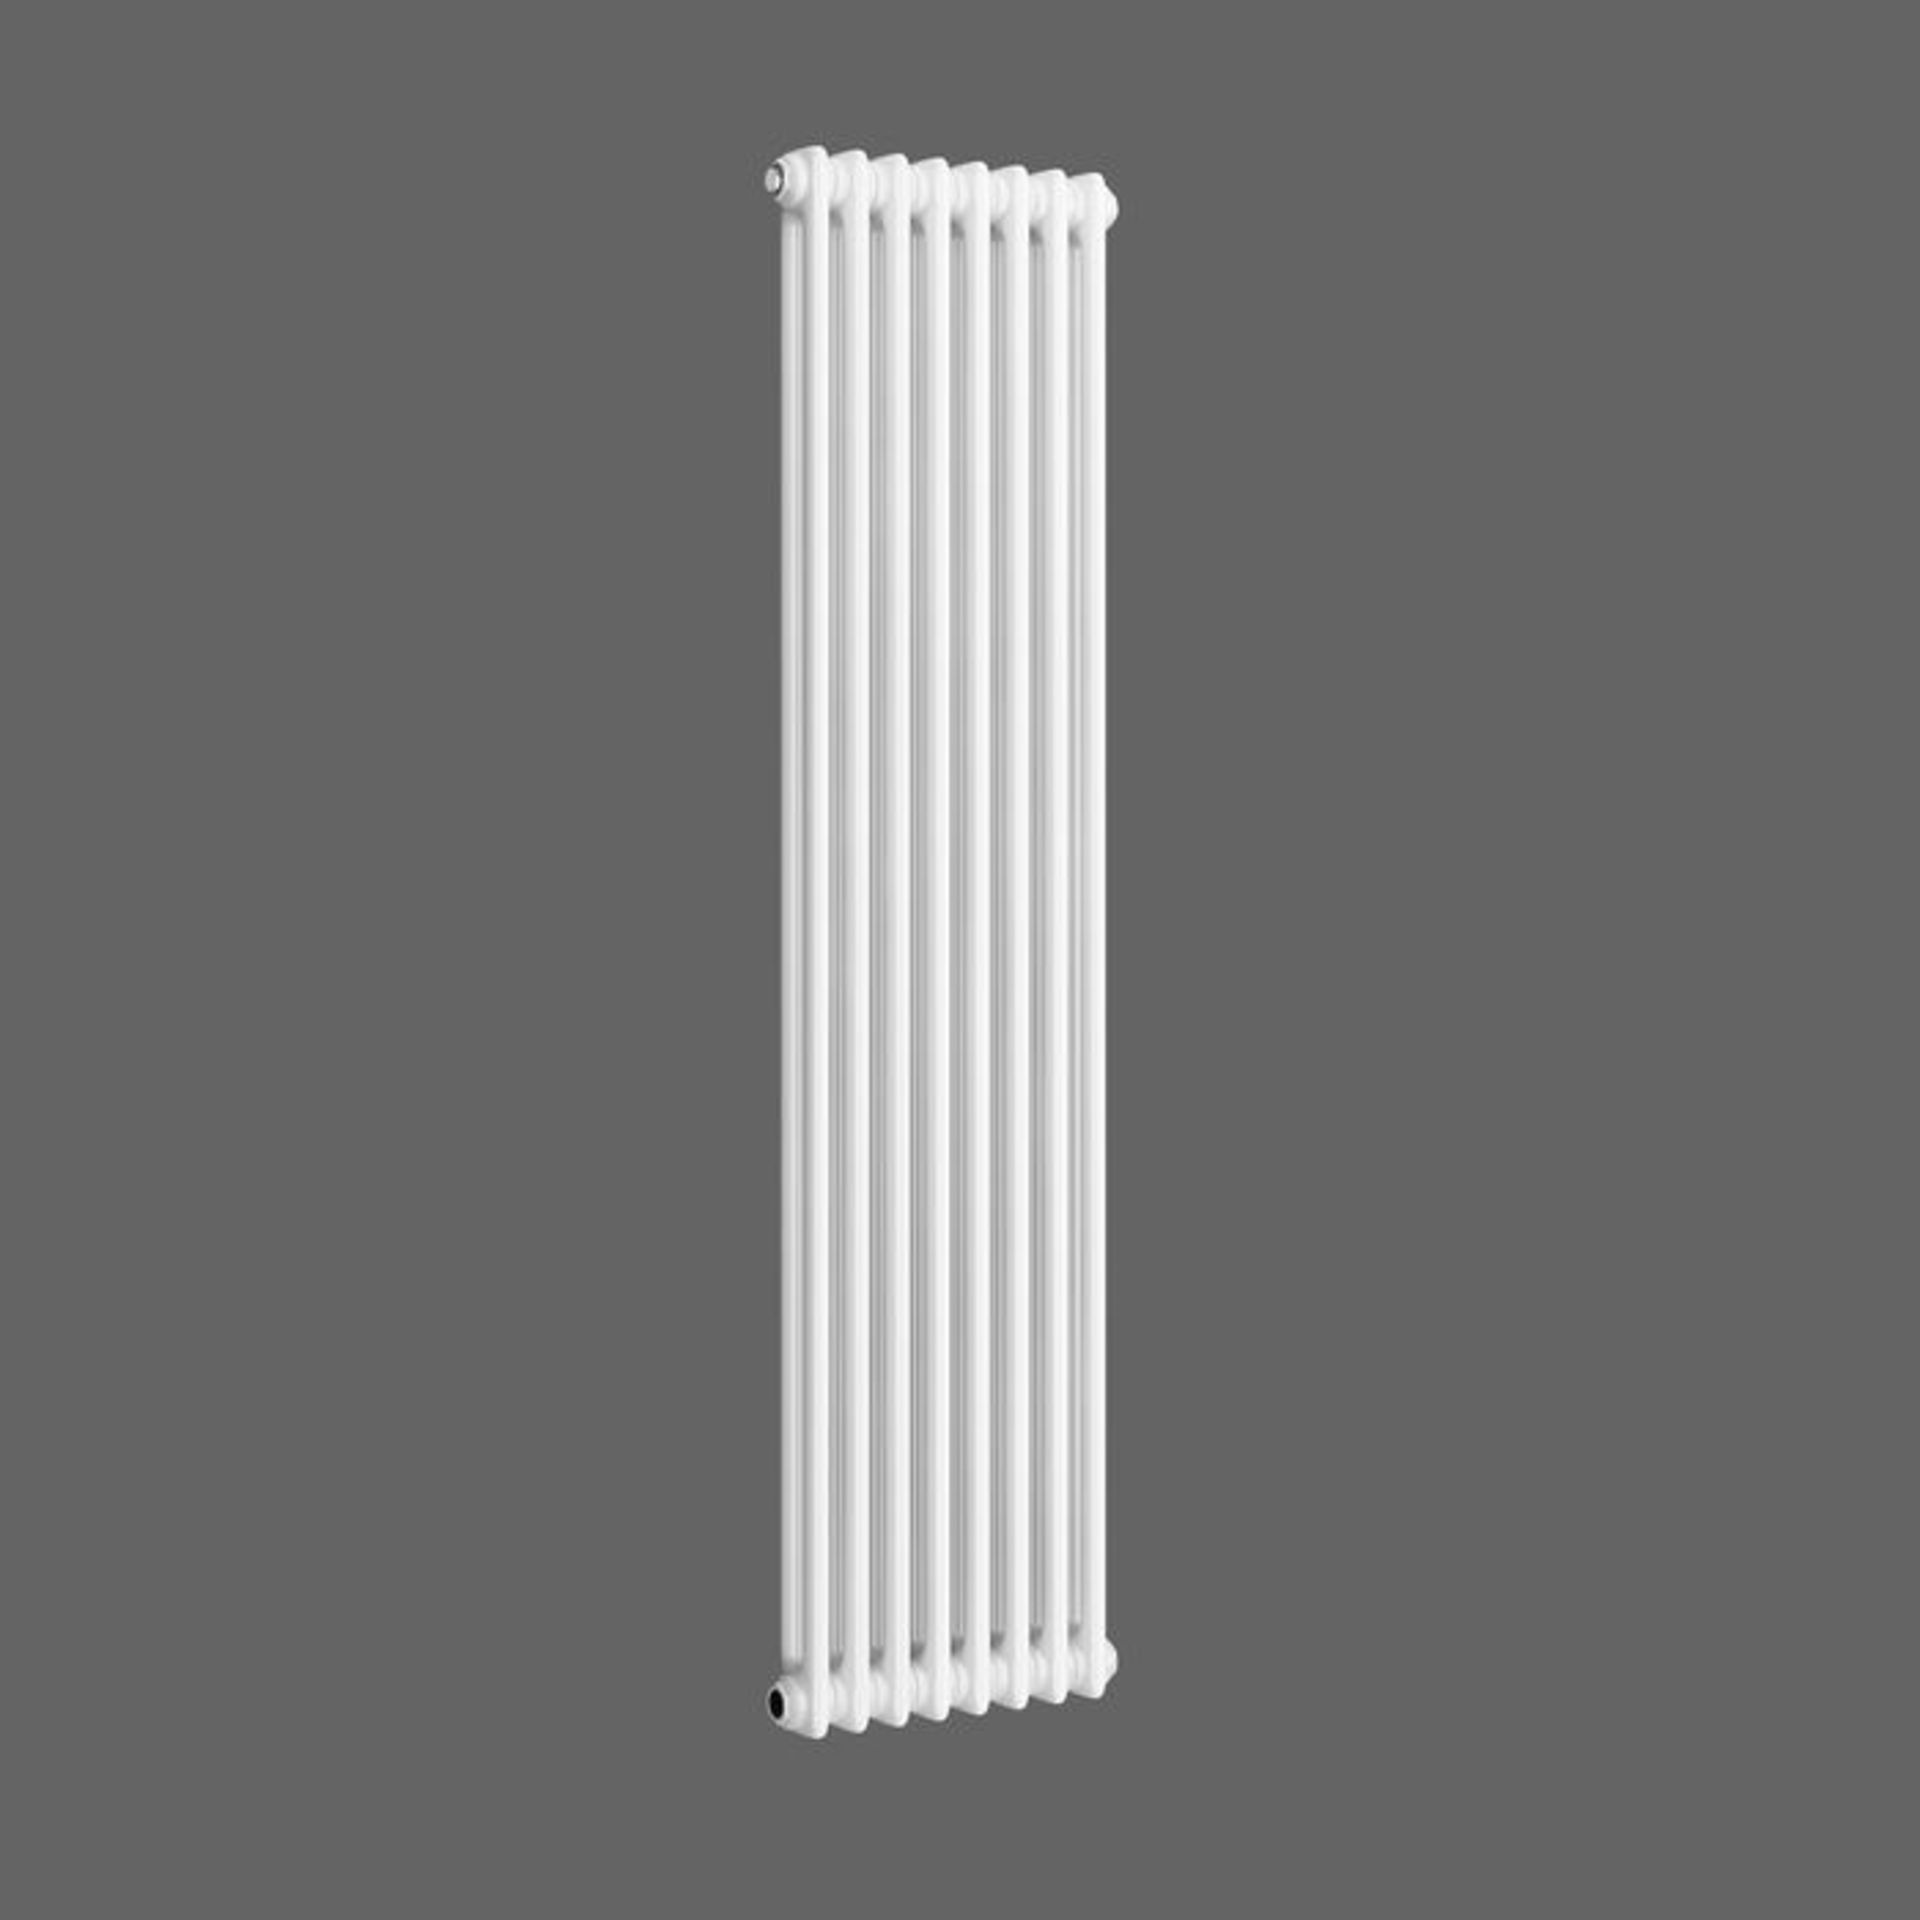 (L115) 1500x380mm White Double Panel Vertical Colosseum Traditional Radiator. RRP £339.99. Low - Image 3 of 3